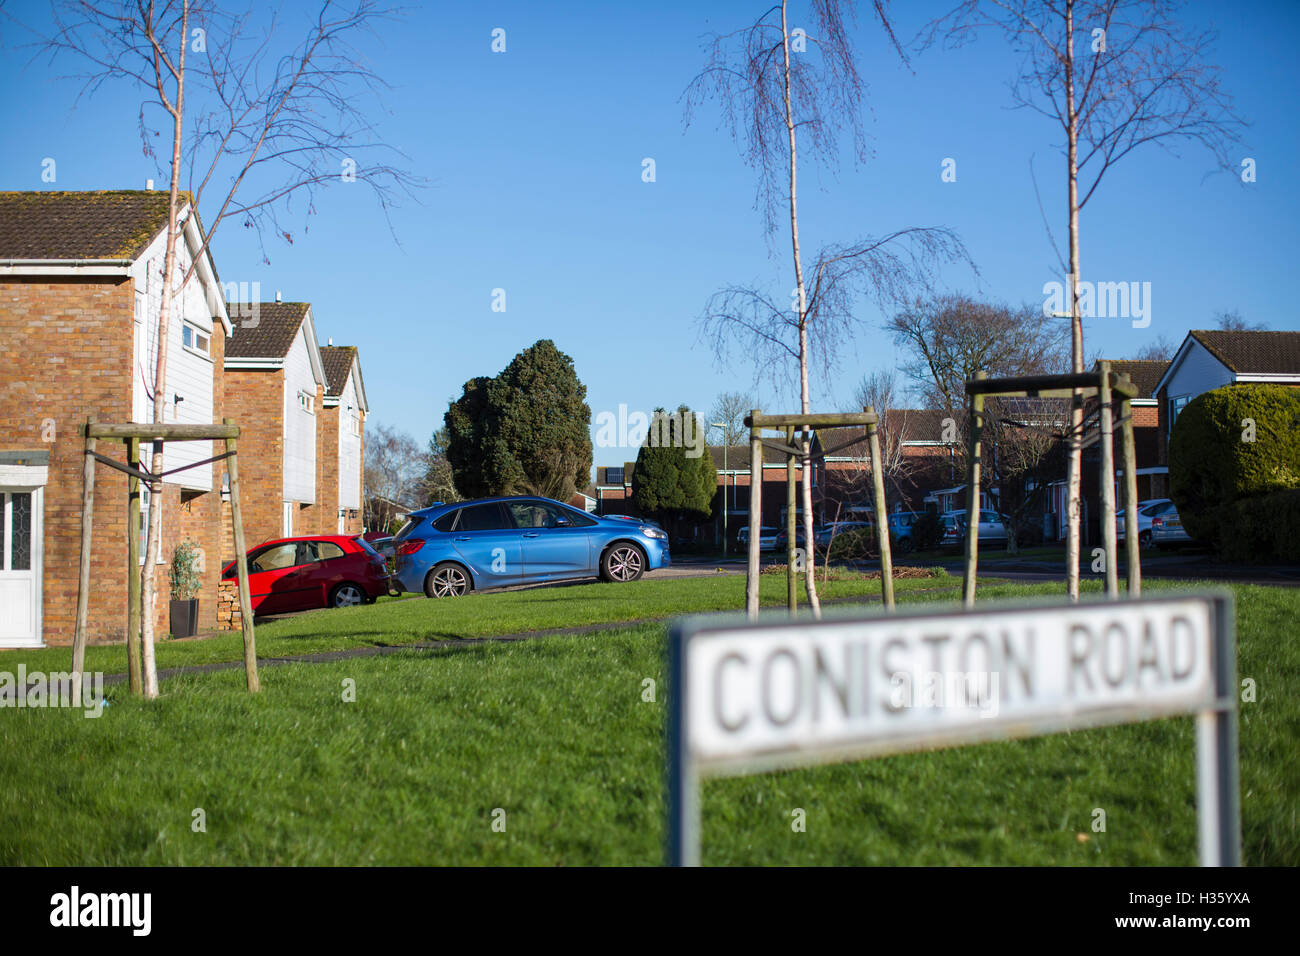 Housing estate in Basingstoke, Hampshire, UK with houses, trees and street furniture. Stock Photo